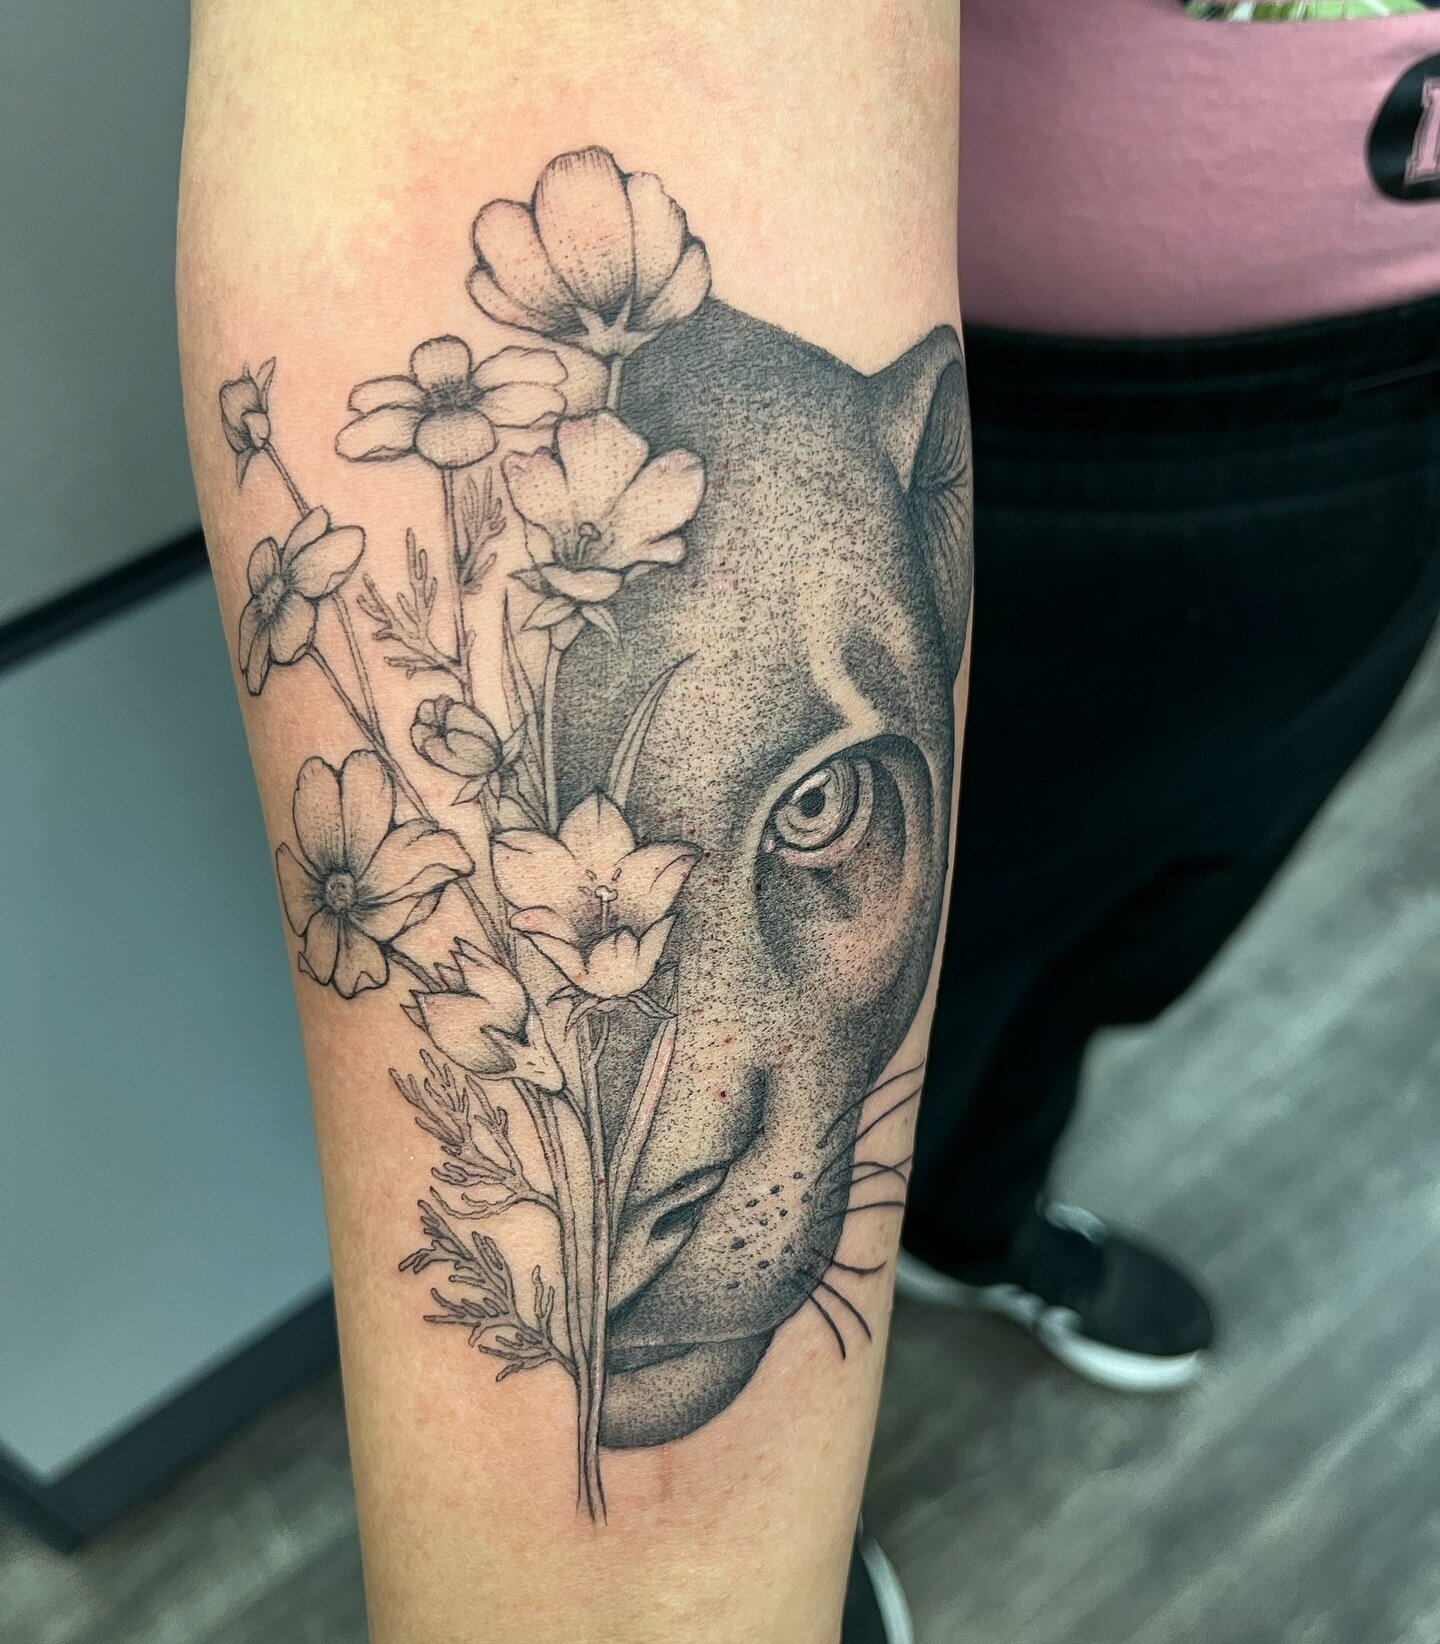 Floral panther on this clients forearm @blackinklinearts 💐
.
.
.
#tattoo #panther #panthertattoo #bramptontattoos #fineline #gta #brampton #floraltattoo #bodymods